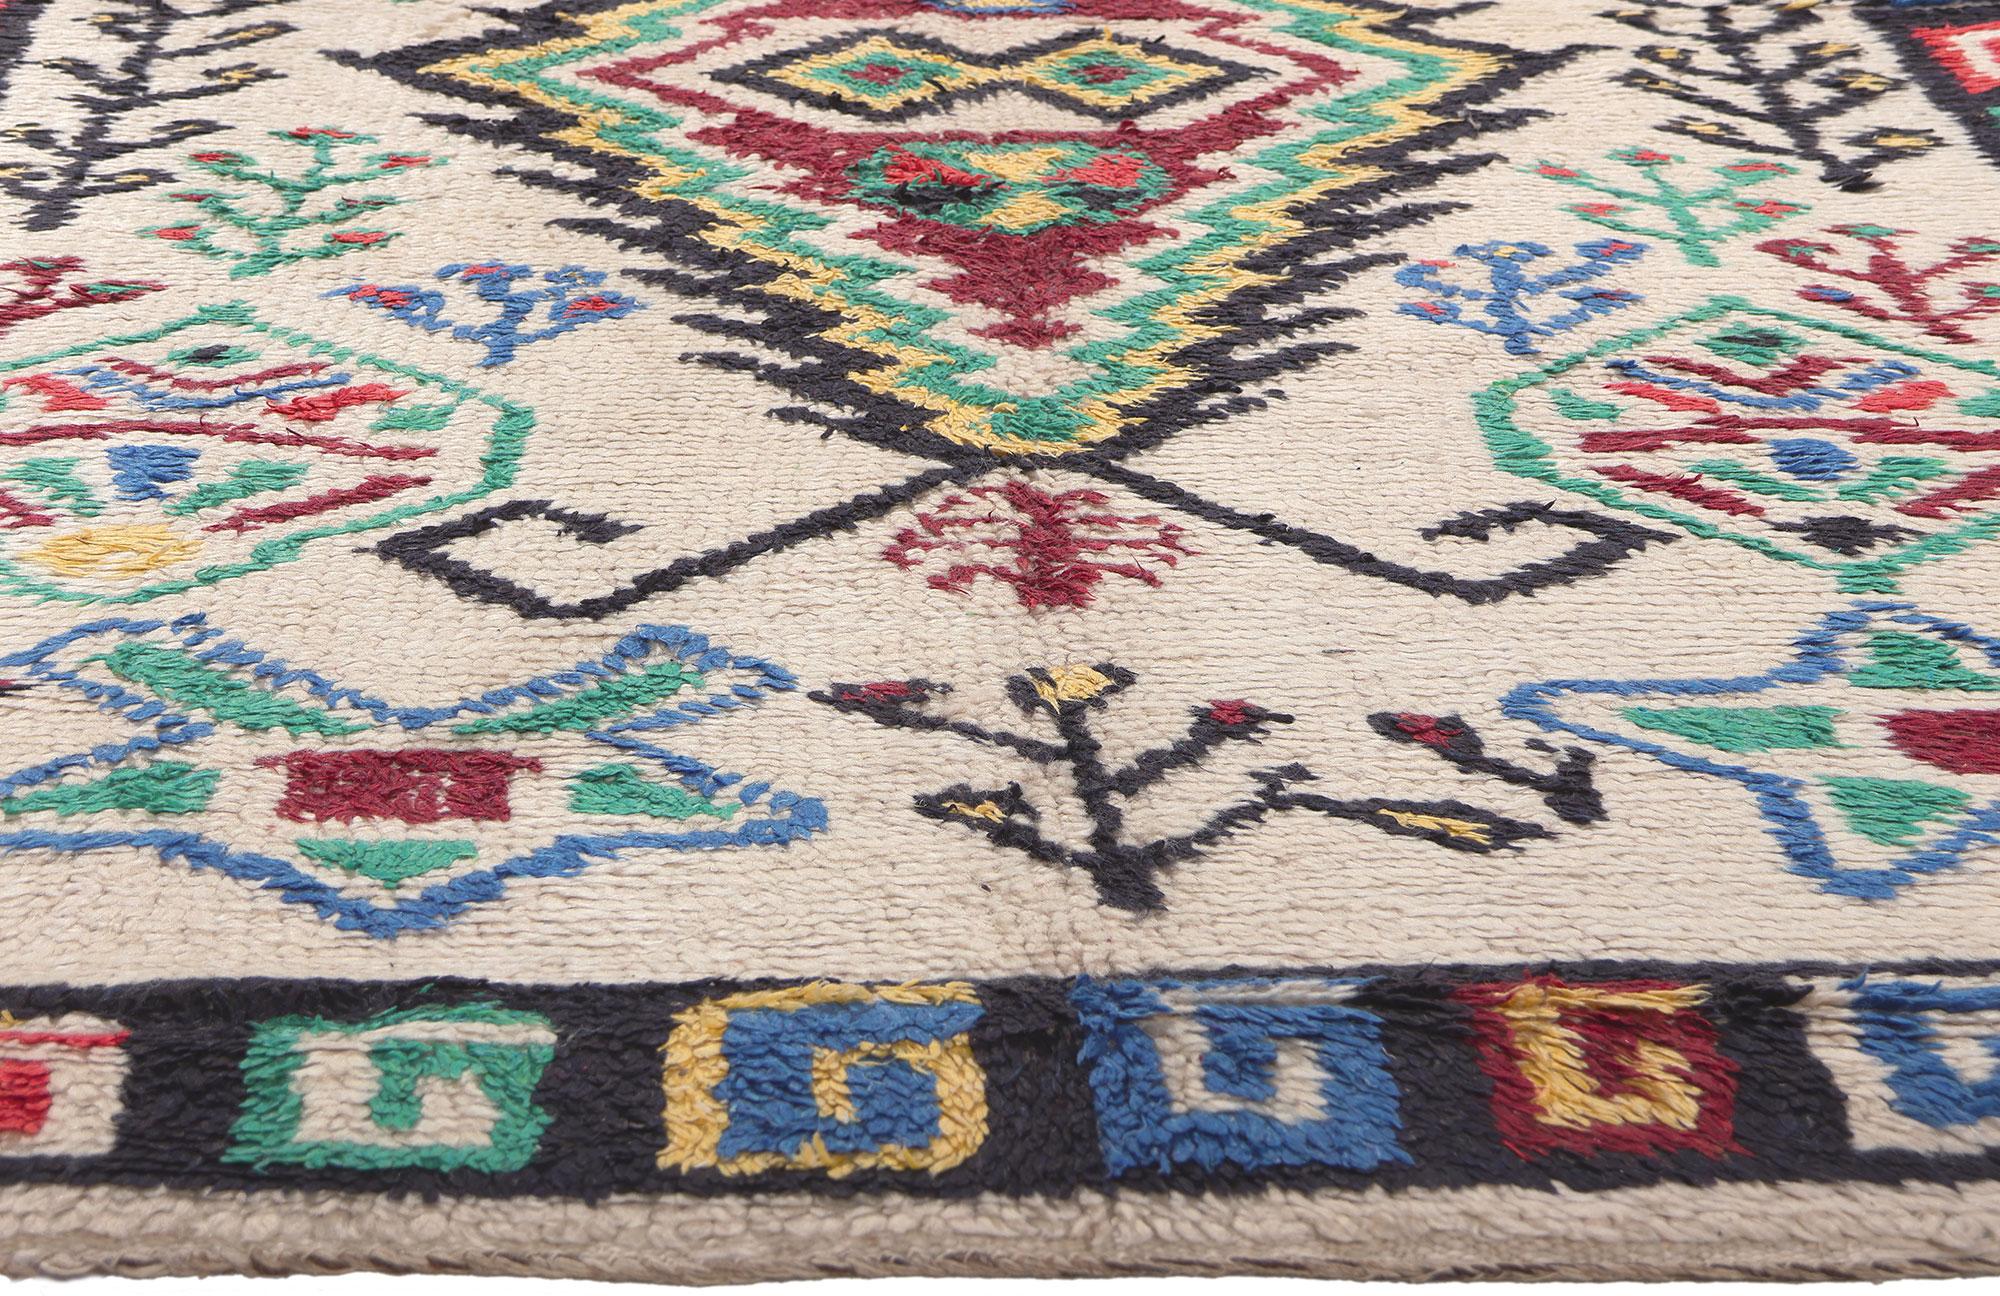 Colorful Vintage Moroccan Azilal Rug, Tribal Enchantment Meets Cozy Boho Chic In Good Condition For Sale In Dallas, TX